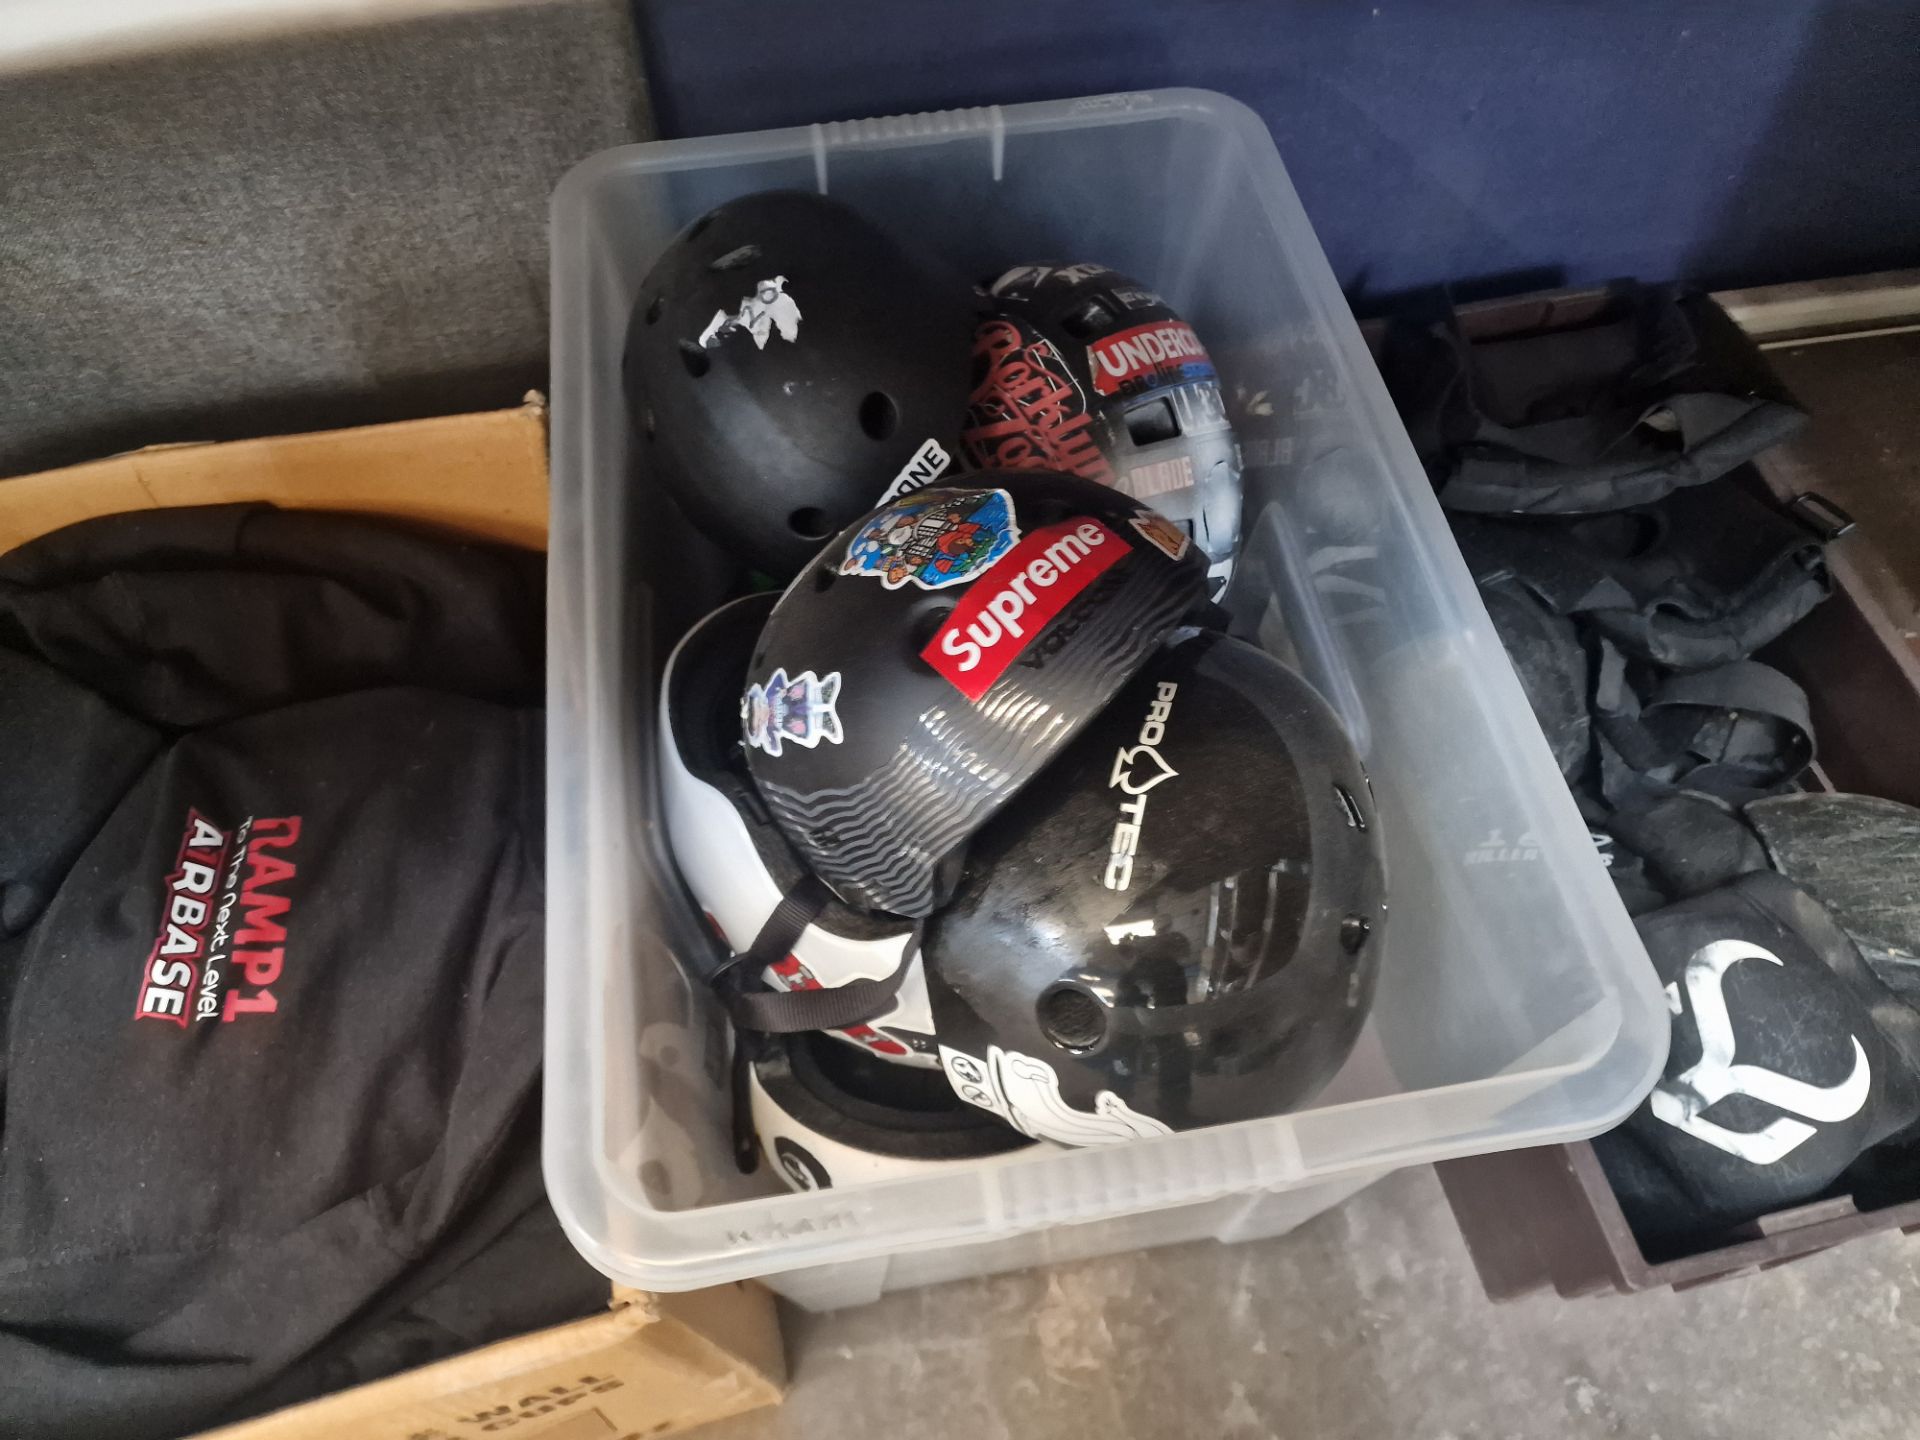 Assorted skateboard related items comprising clothing plus the contents of a crate of helmets and th - Image 3 of 4